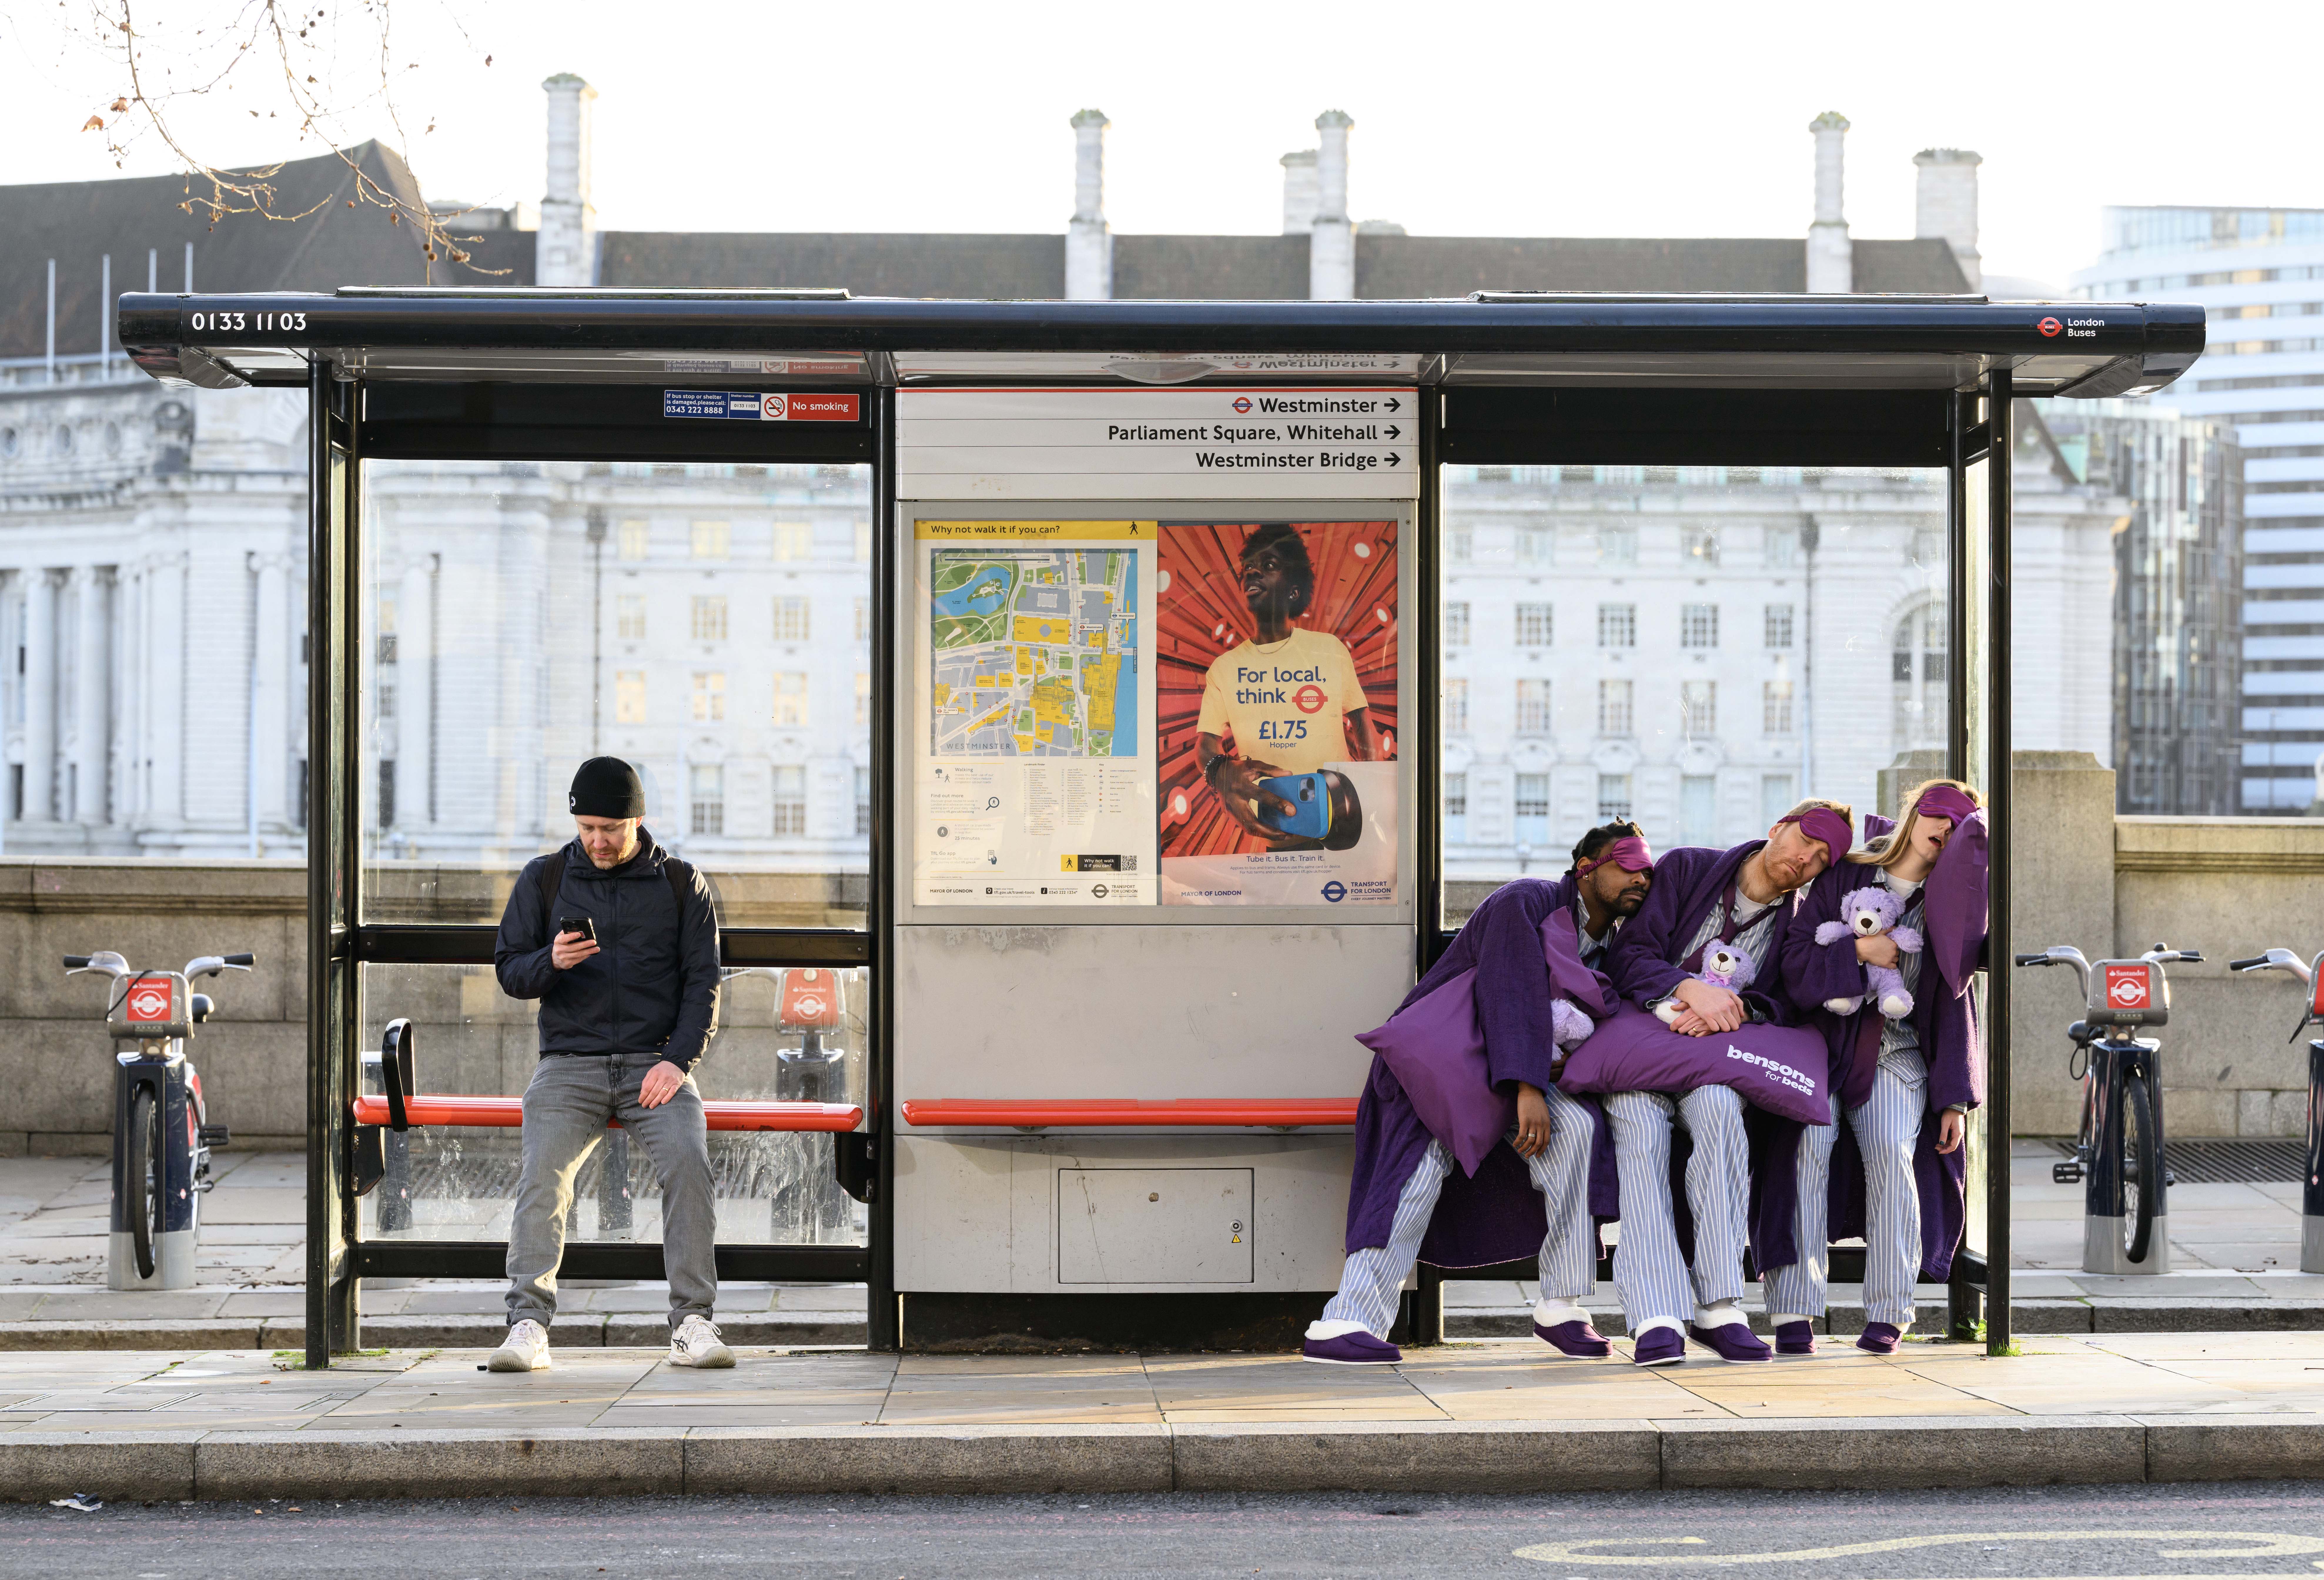 Three people asleep at a bus stop wearing pyjamas, purple dressing gowns, and purple slippers. Each has their own Bensons for Beds pillow, sleep mask, and teddy bear. A man sits solo at the other side of the bus stop busy on his smart phone as he waits for a bus to work.